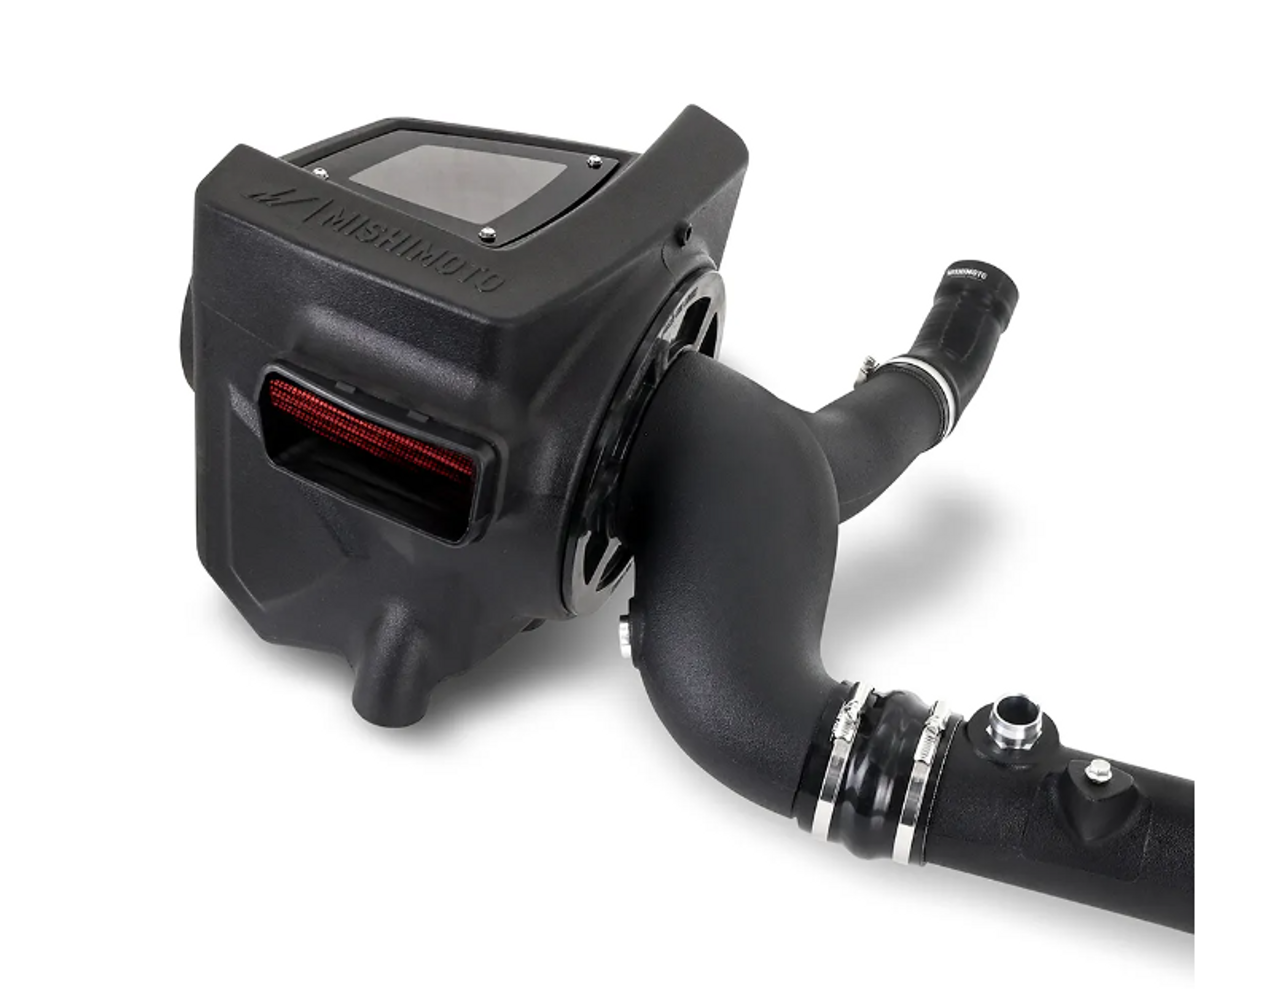 Mishimoto MMAI-BR27-21DW Air Intake with Dry Washable Filter for Ford Bronco 2.7L 2021+